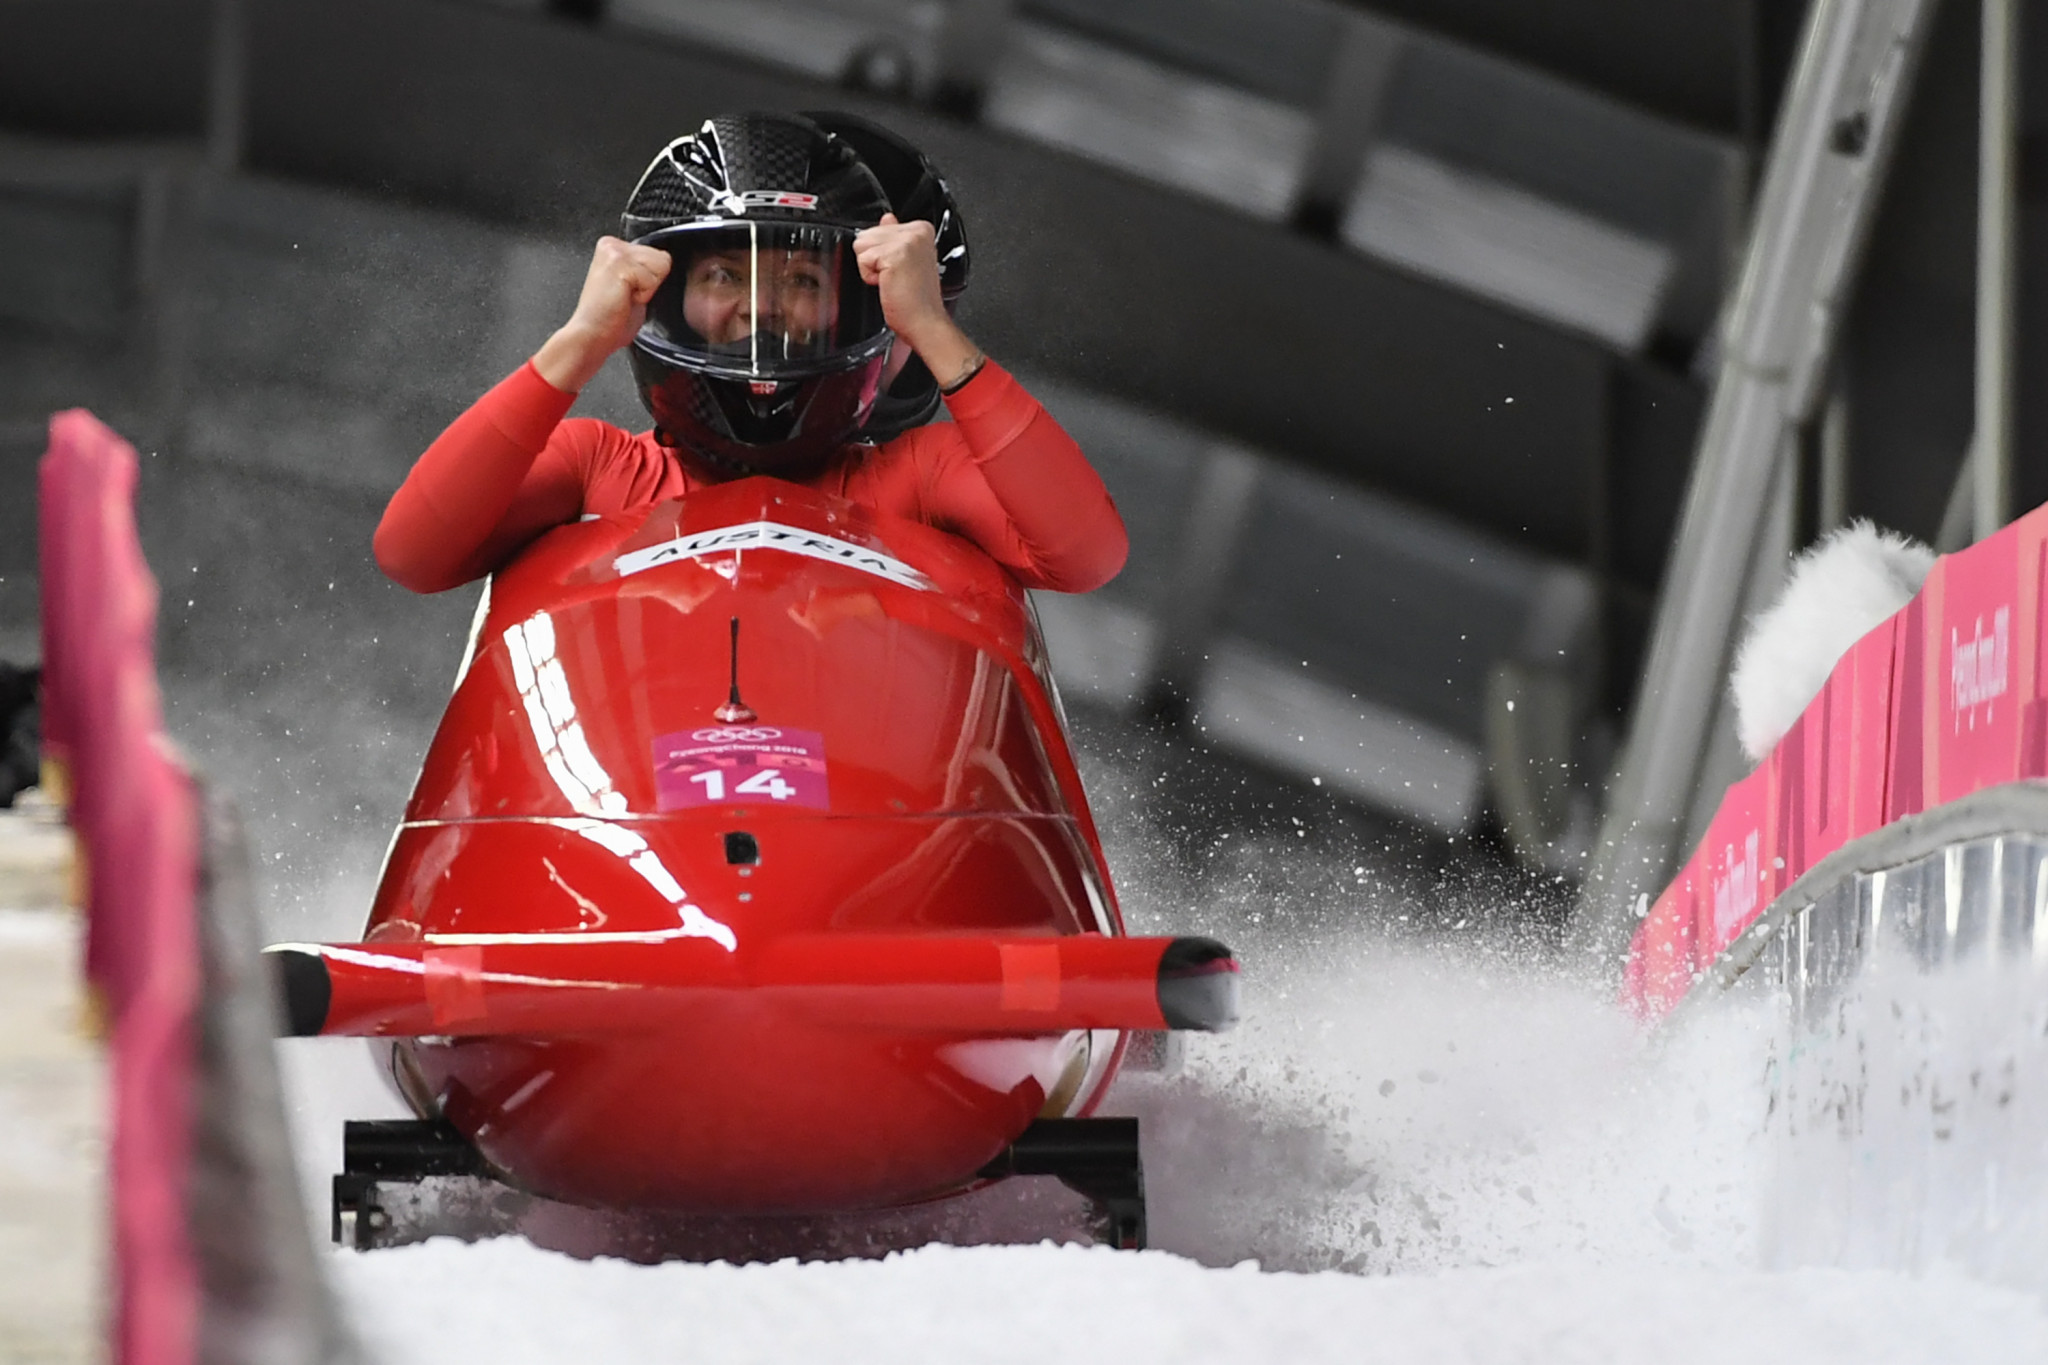 Austria's Christina Hengster finished tenth in the women's bobsleigh at the 2018 Pyeongchang Winter Games ©Getty Images